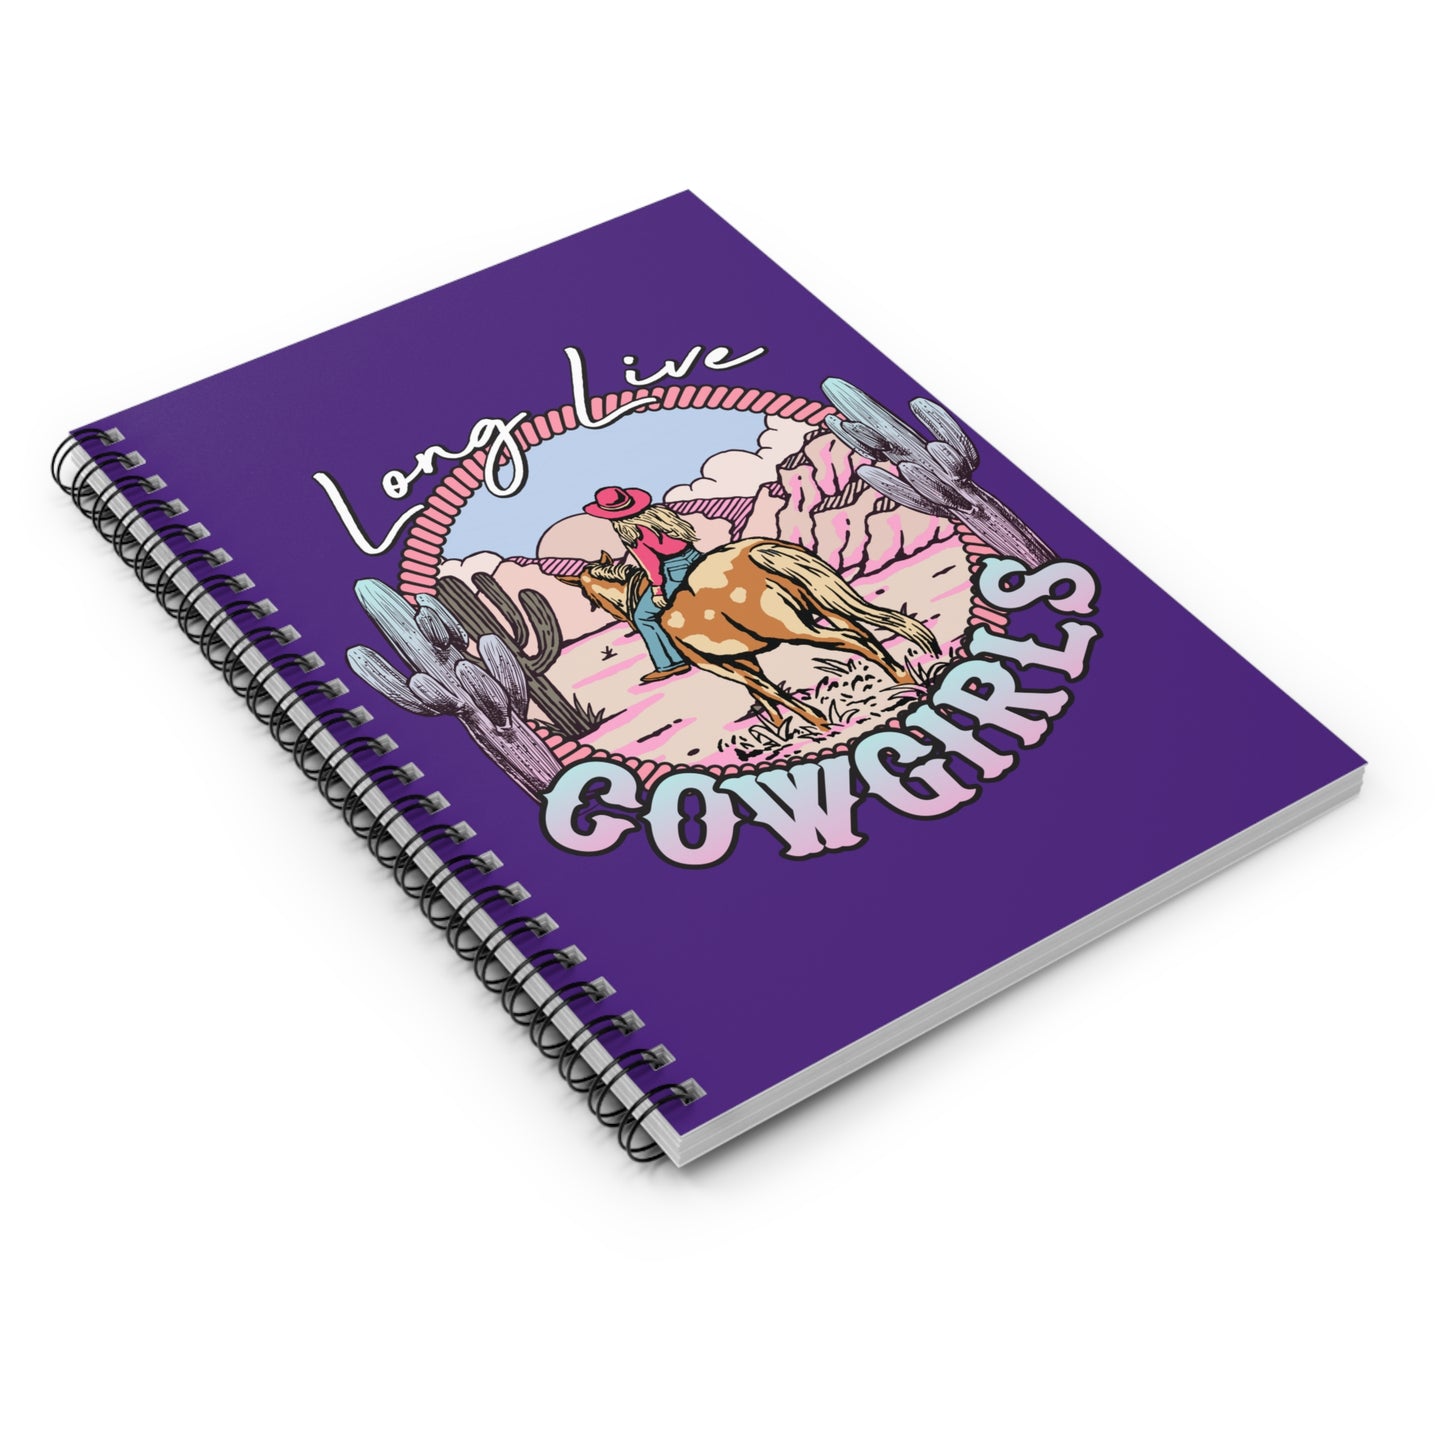 Long Live Cowgirls: Spiral Notebook - Log Books - Journals - Diaries - and More Custom Printed by TheGlassyLass